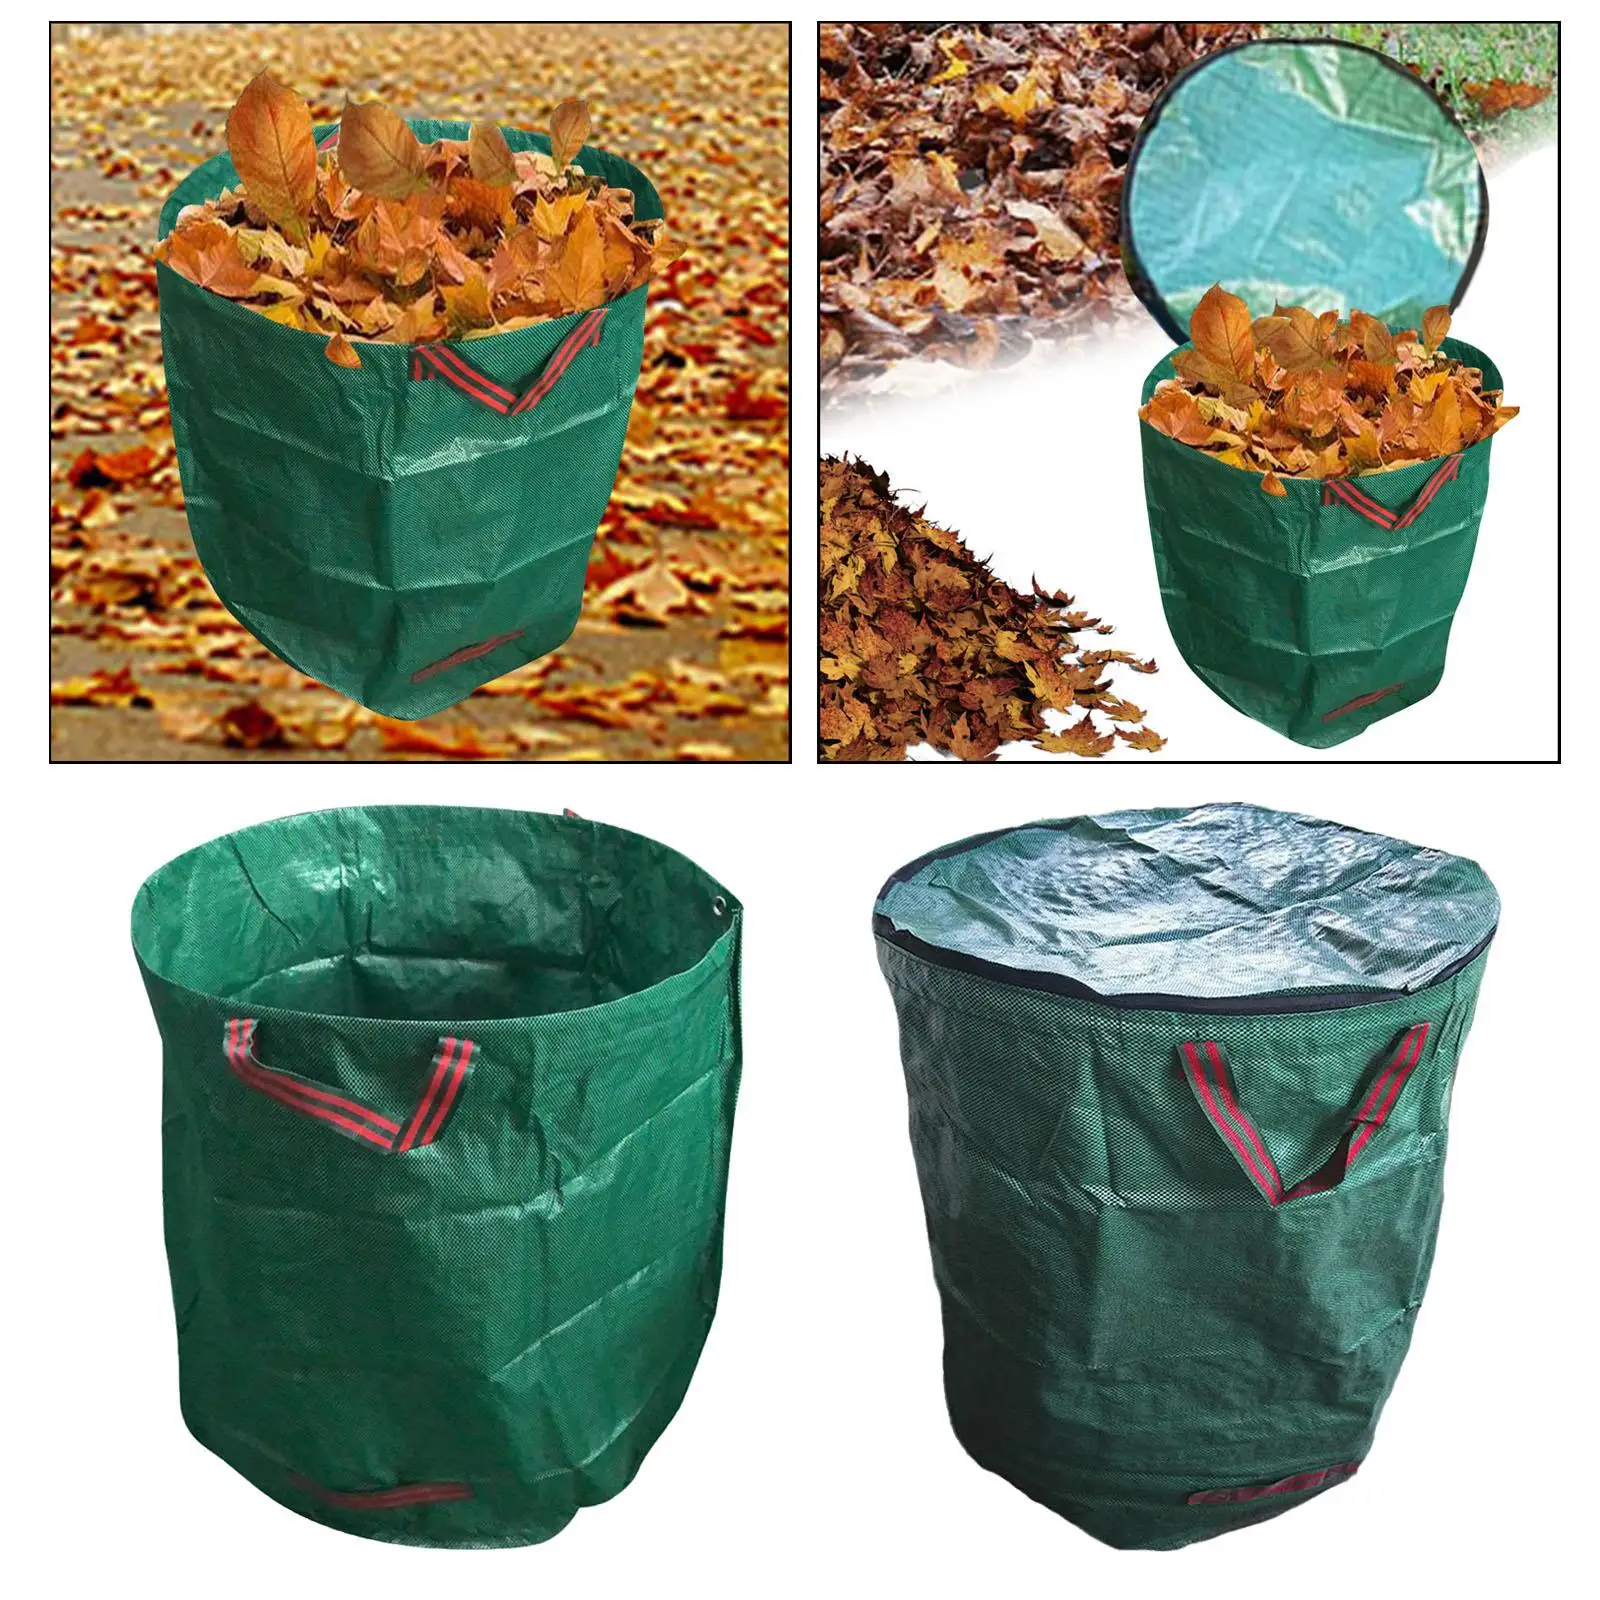 Garden Waste Bags Laundry Container Lawn Garden Bags Gardening Bags for Garden Lawn Pool Debris Grass Clipping Loading Leaf